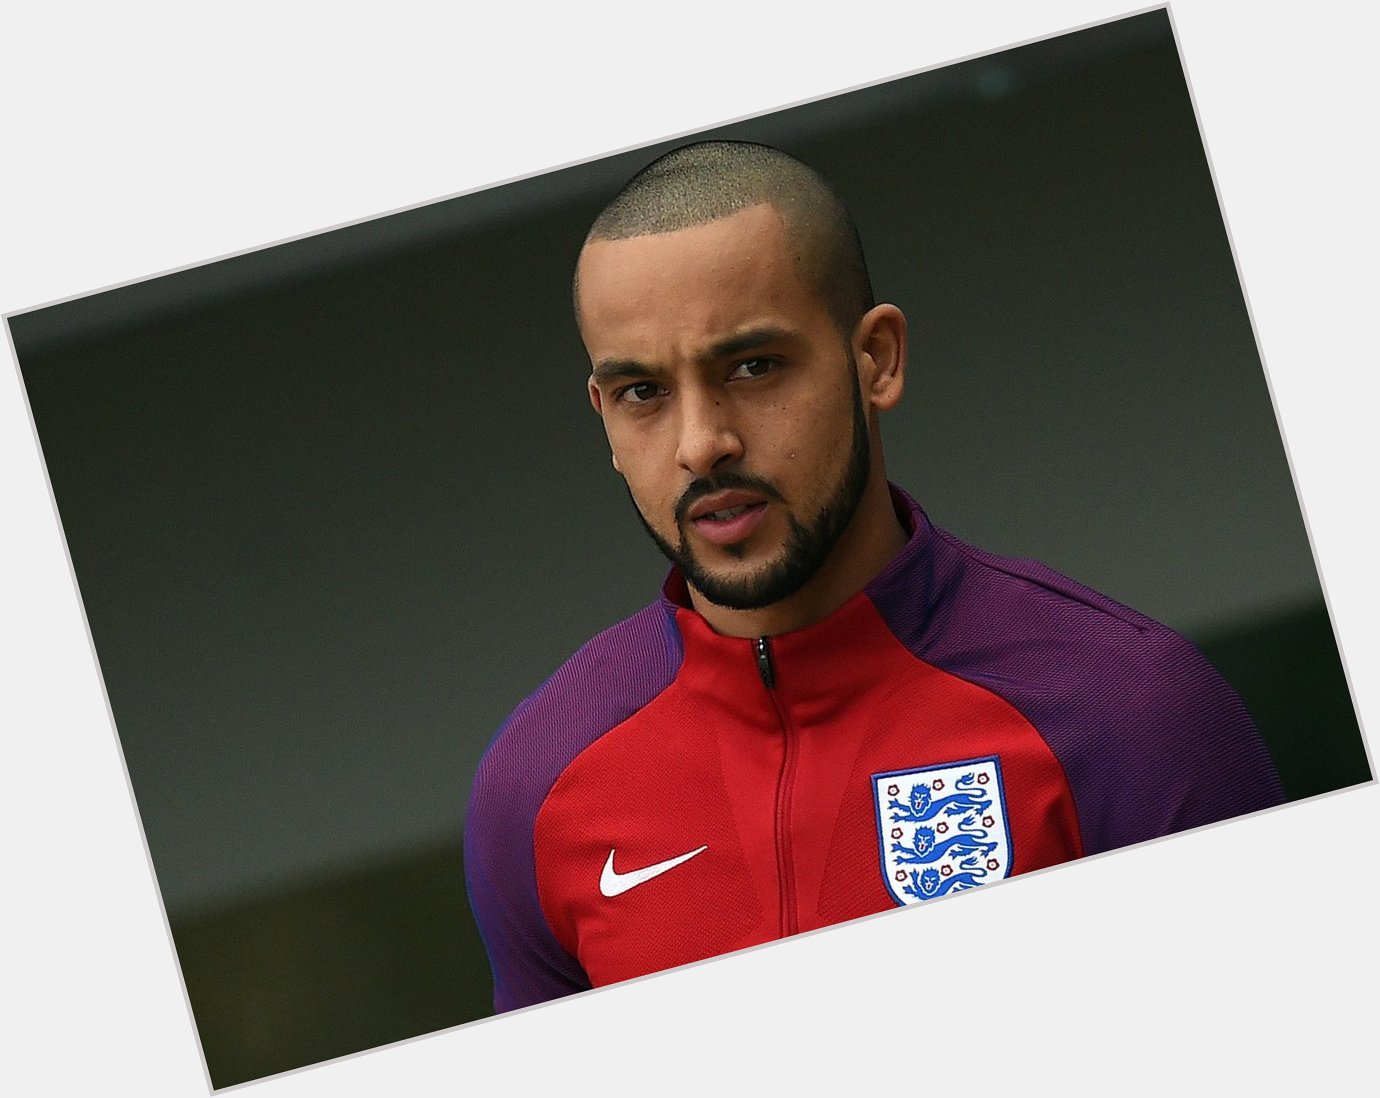  ON WITH Wishes:
Theo Walcott A Happy Birthday! 